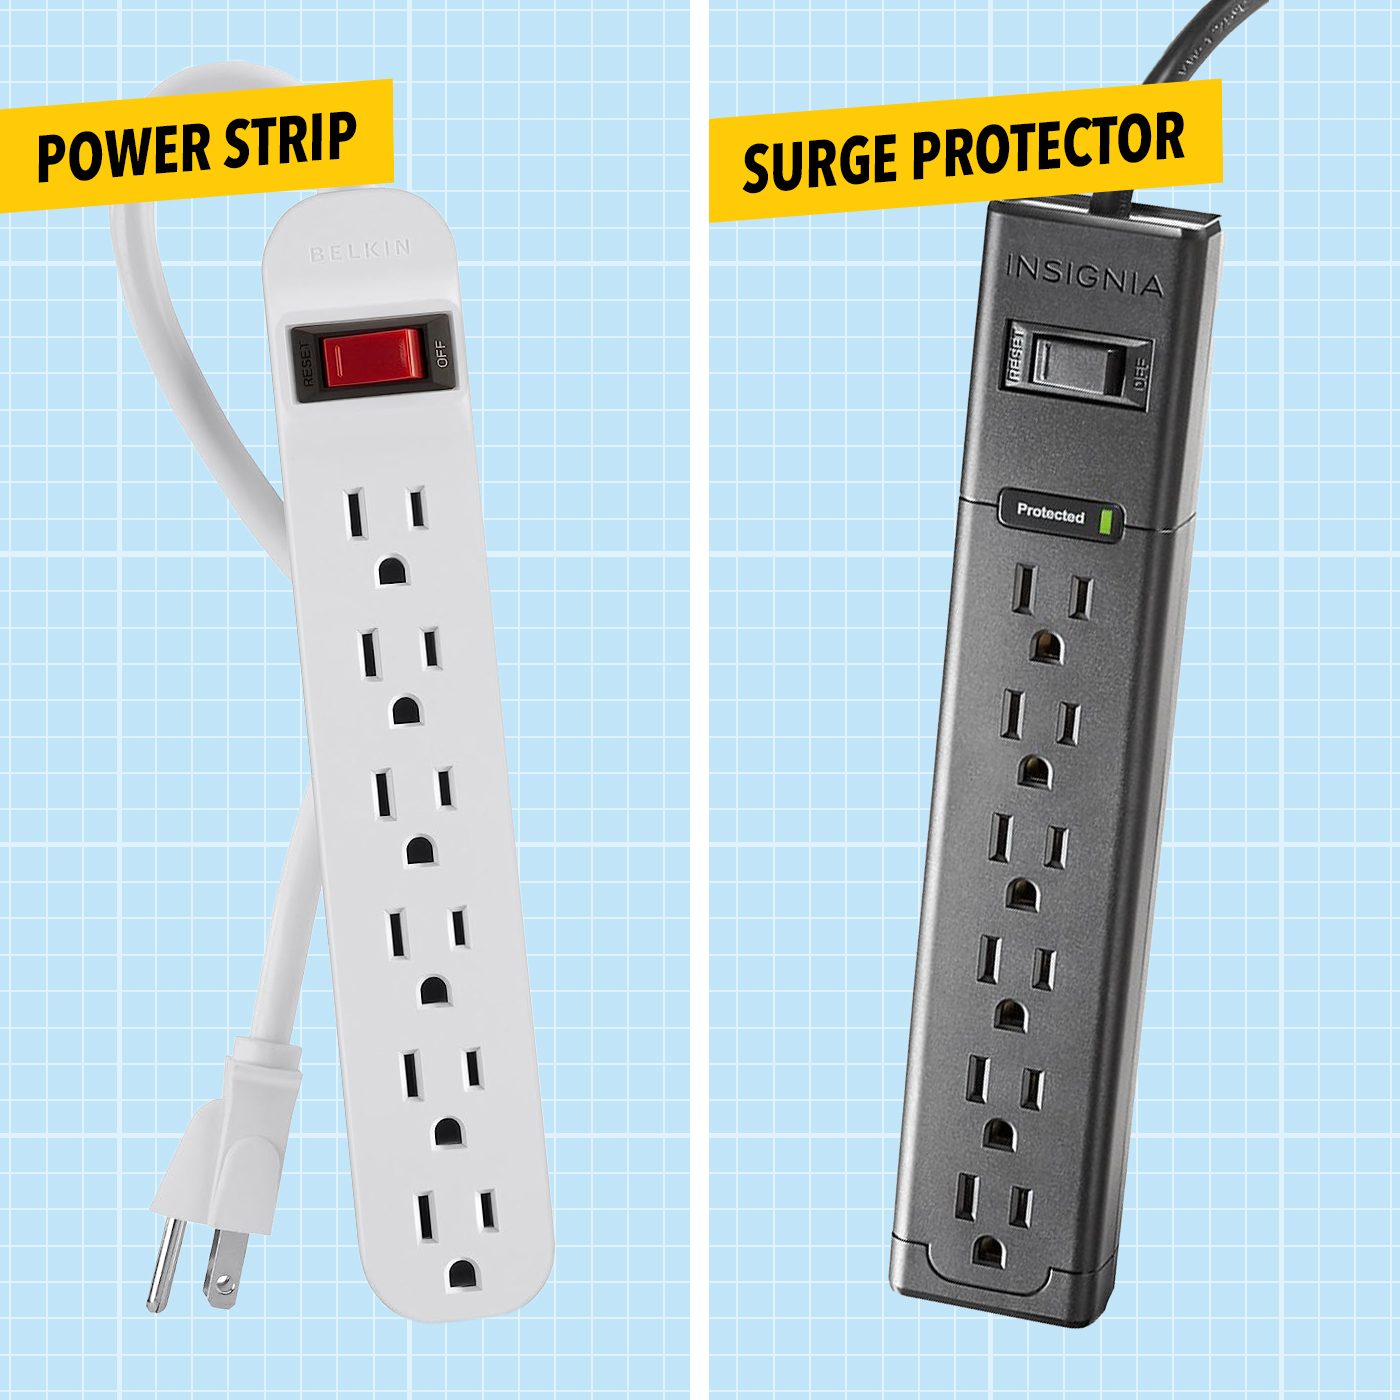 High-Capacity Electronic Surge Protector - Shop Today